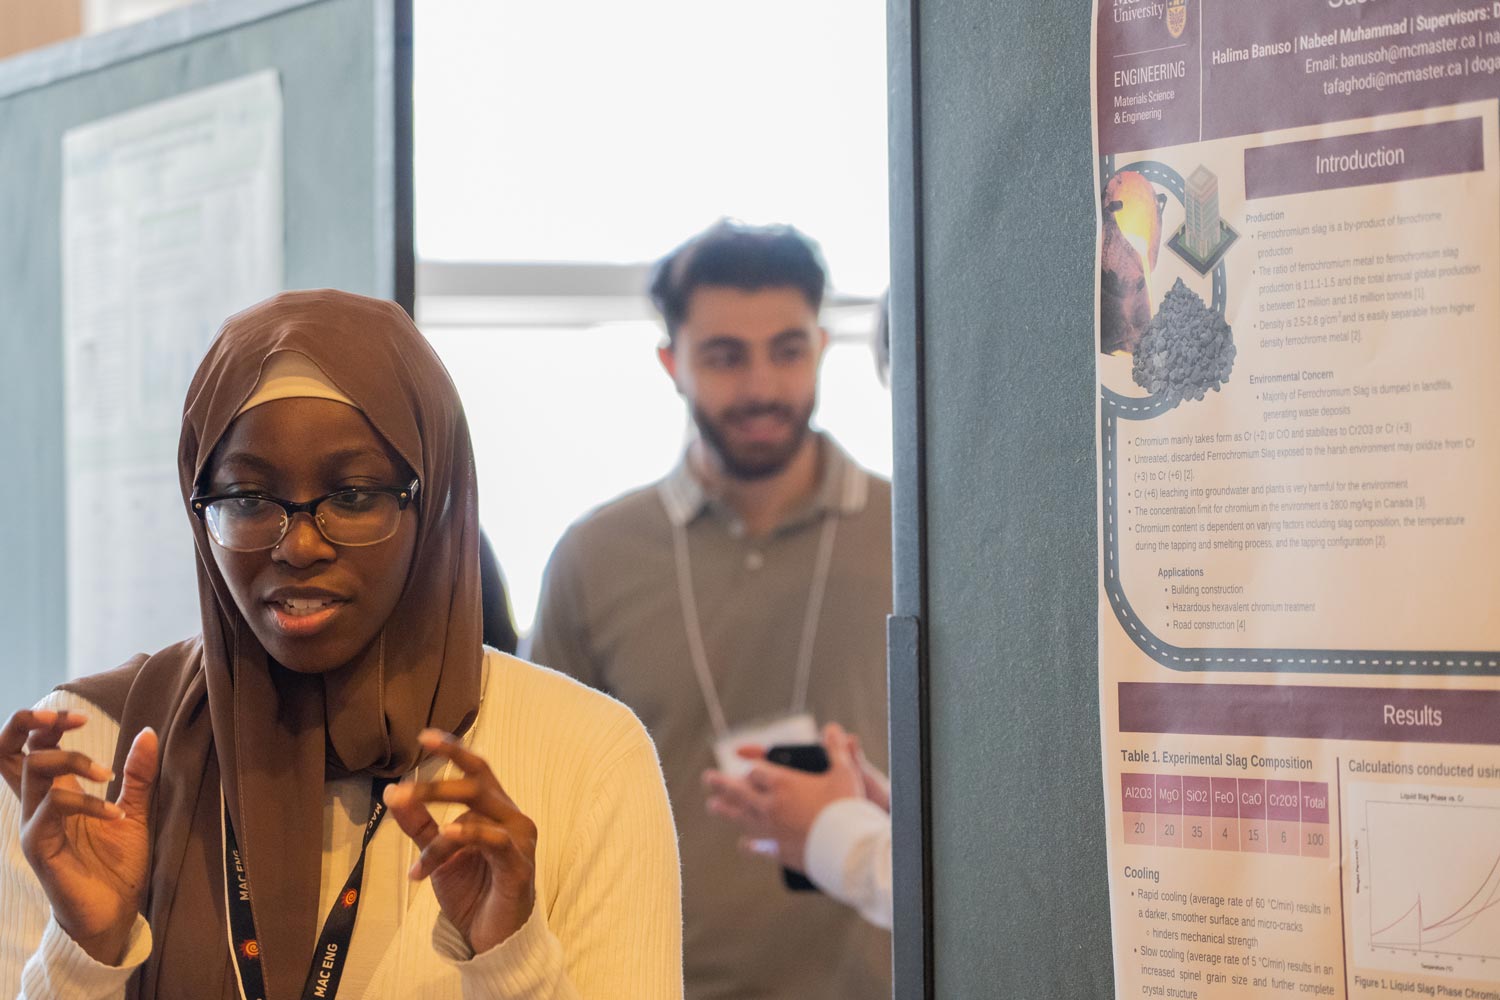 Halima chats with people around her poster